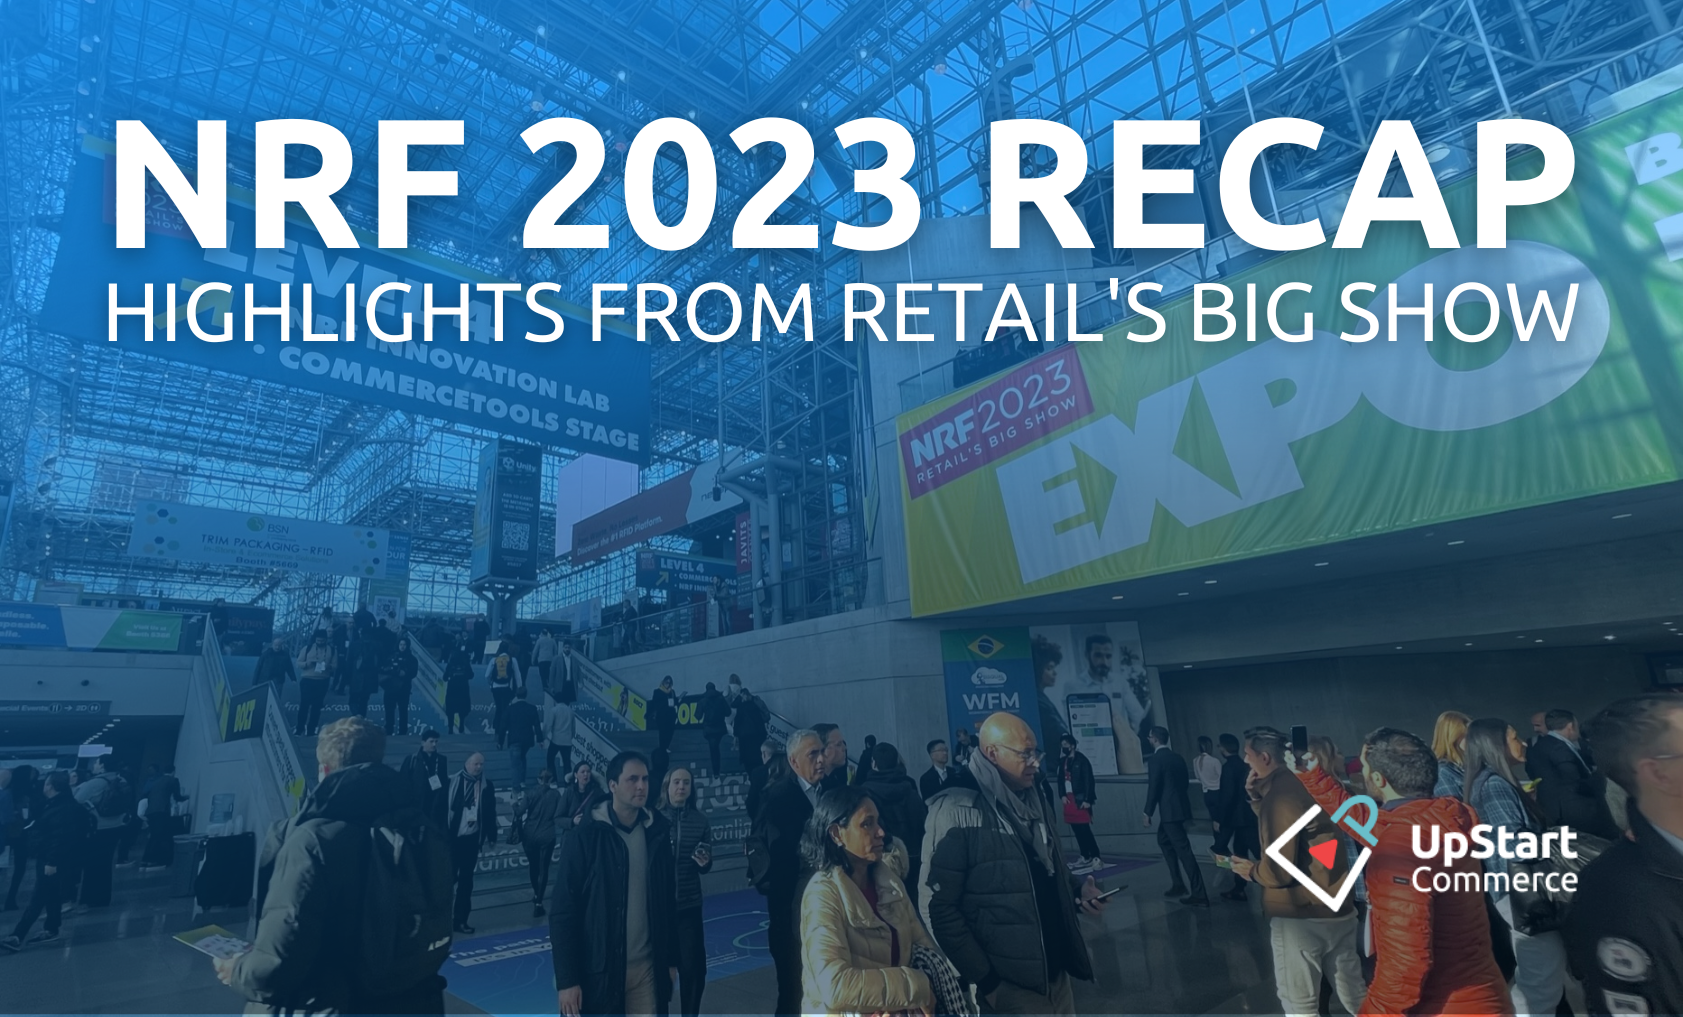 "NRF 2023 Recap -- Highlights from Retail's Big Show" Image with people walking in the Javits Center in NYC